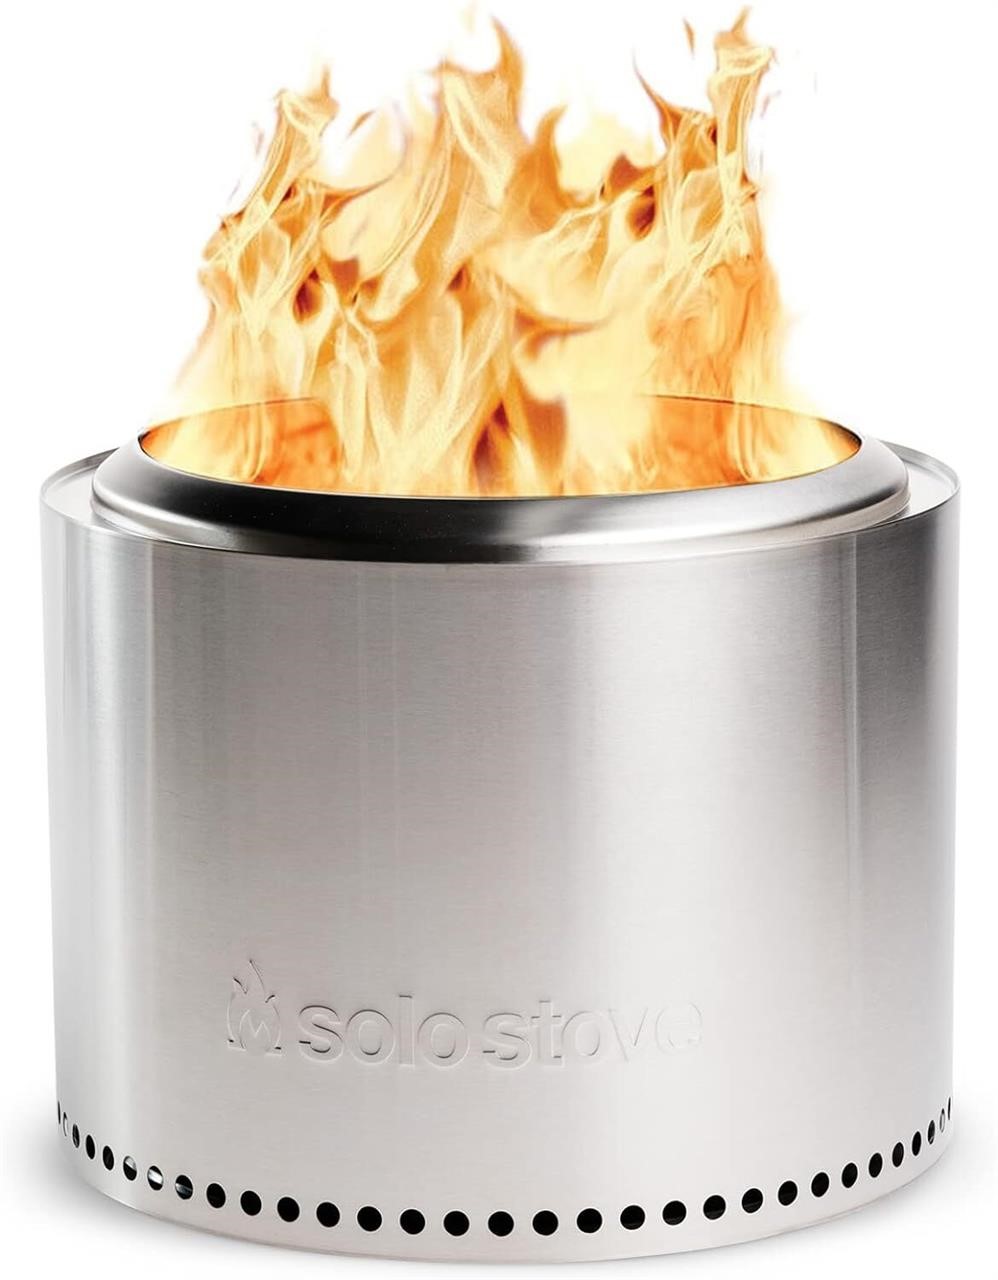 Solo Stove H:14 x D:19.5in  20lbs